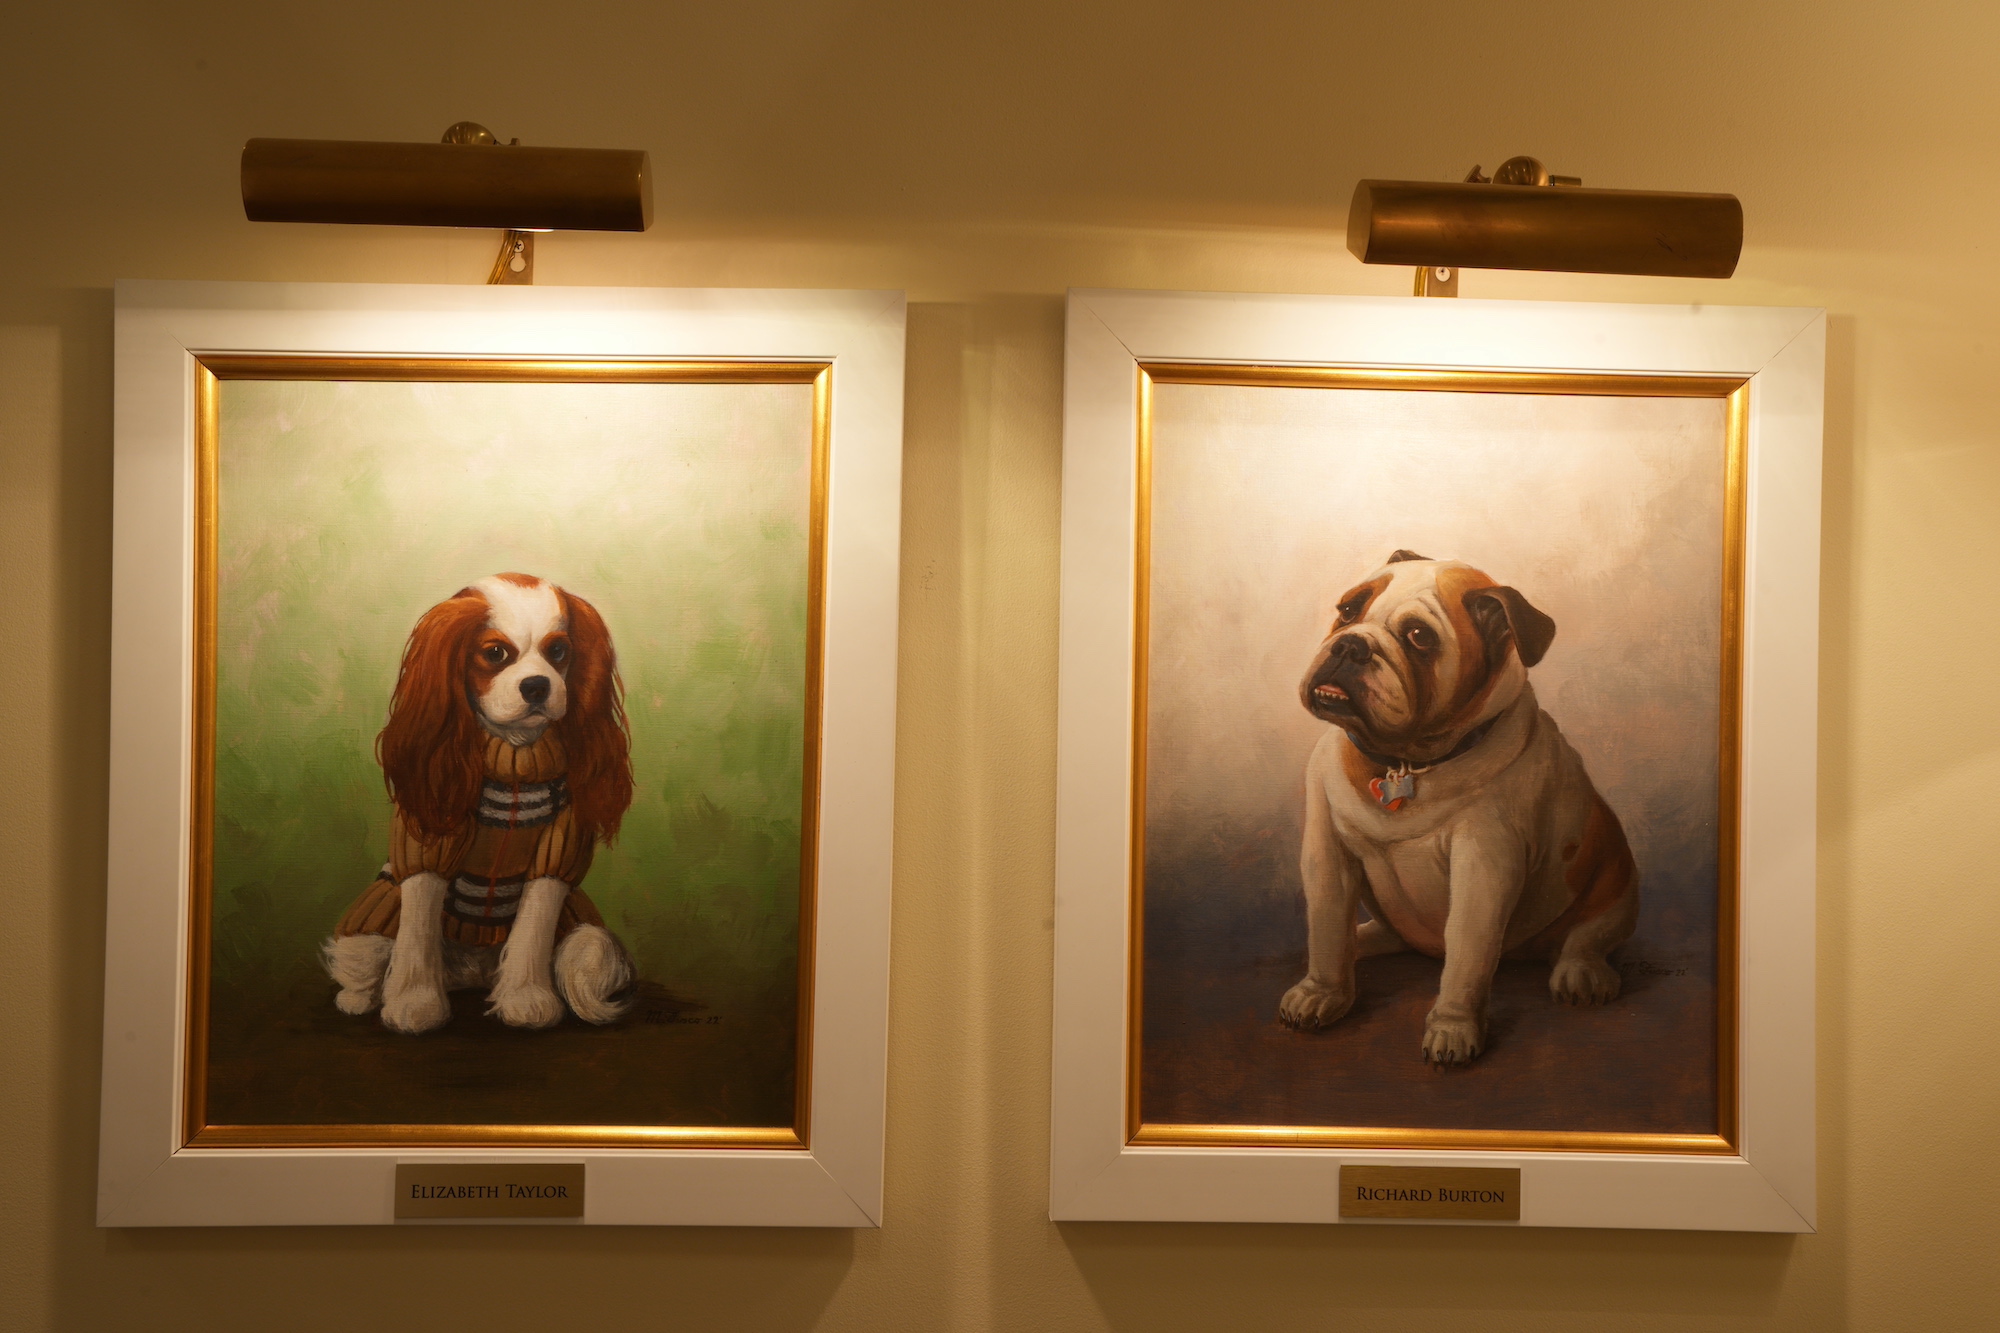 Portraits of Charlotte's dogs in “And Just Like That…”, Elizabeth Taylor and Richard Burton, were created for her apartment - Effect Magazine